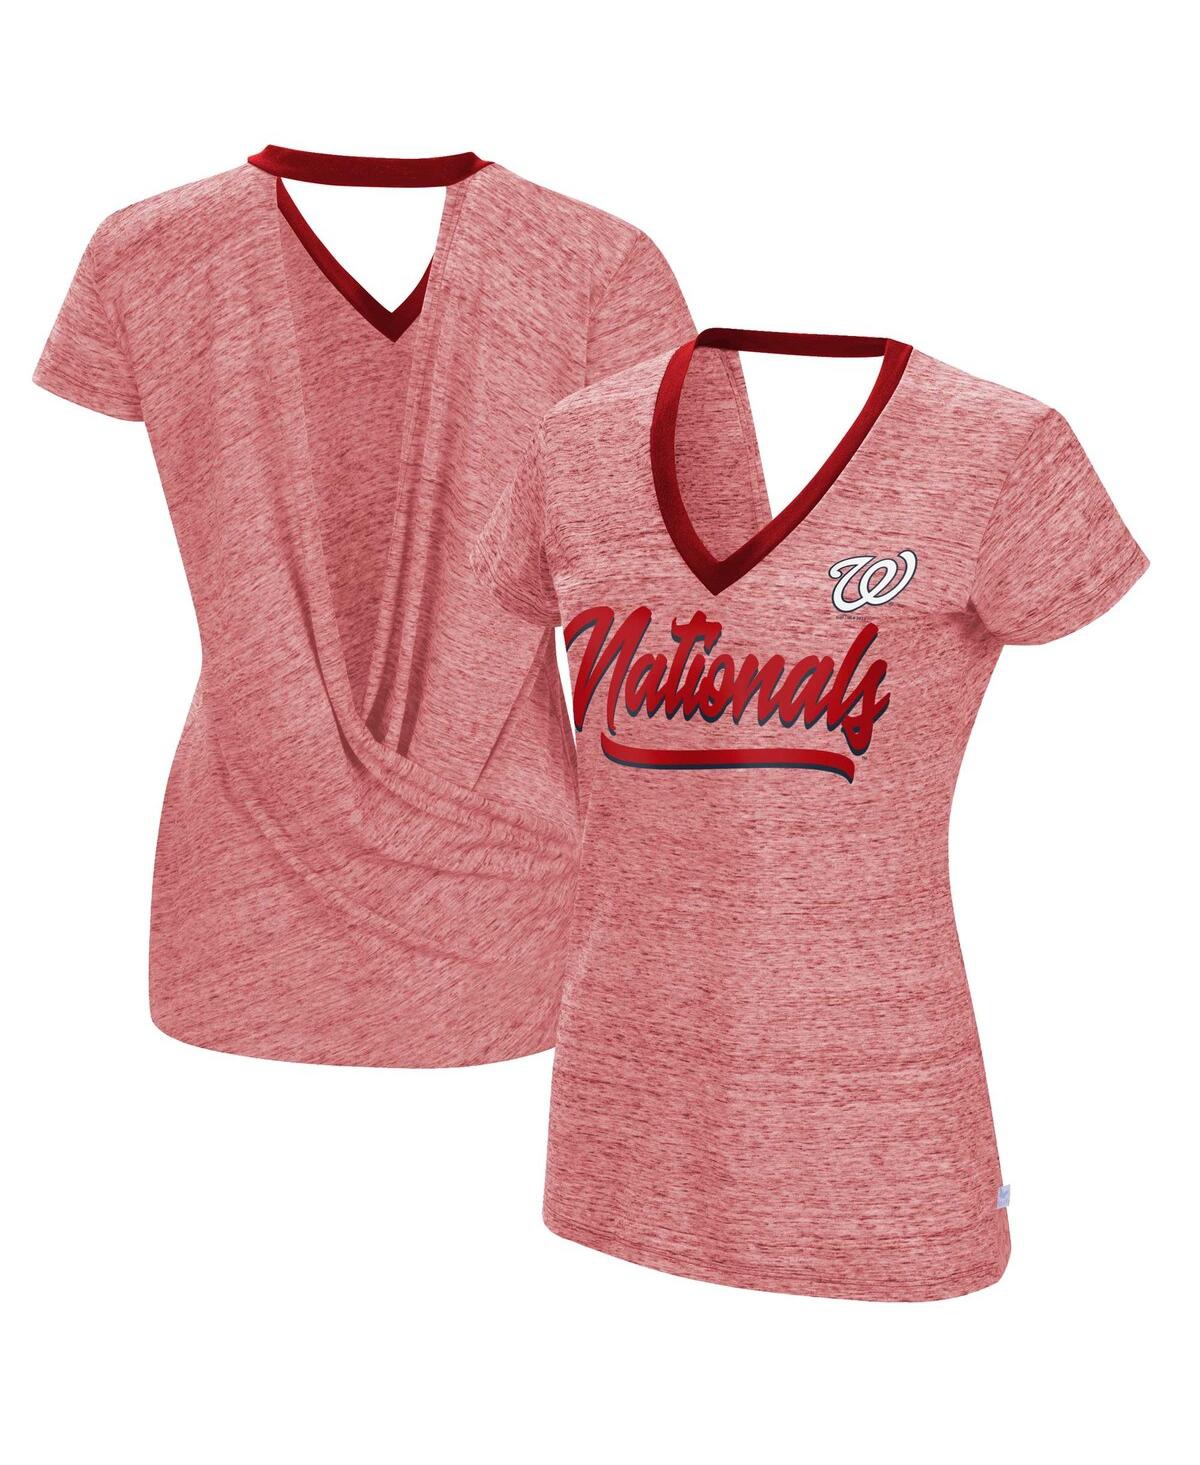 Women's Touch Red Washington Nationals Halftime Back Wrap Top V-Neck T-shirt - Red